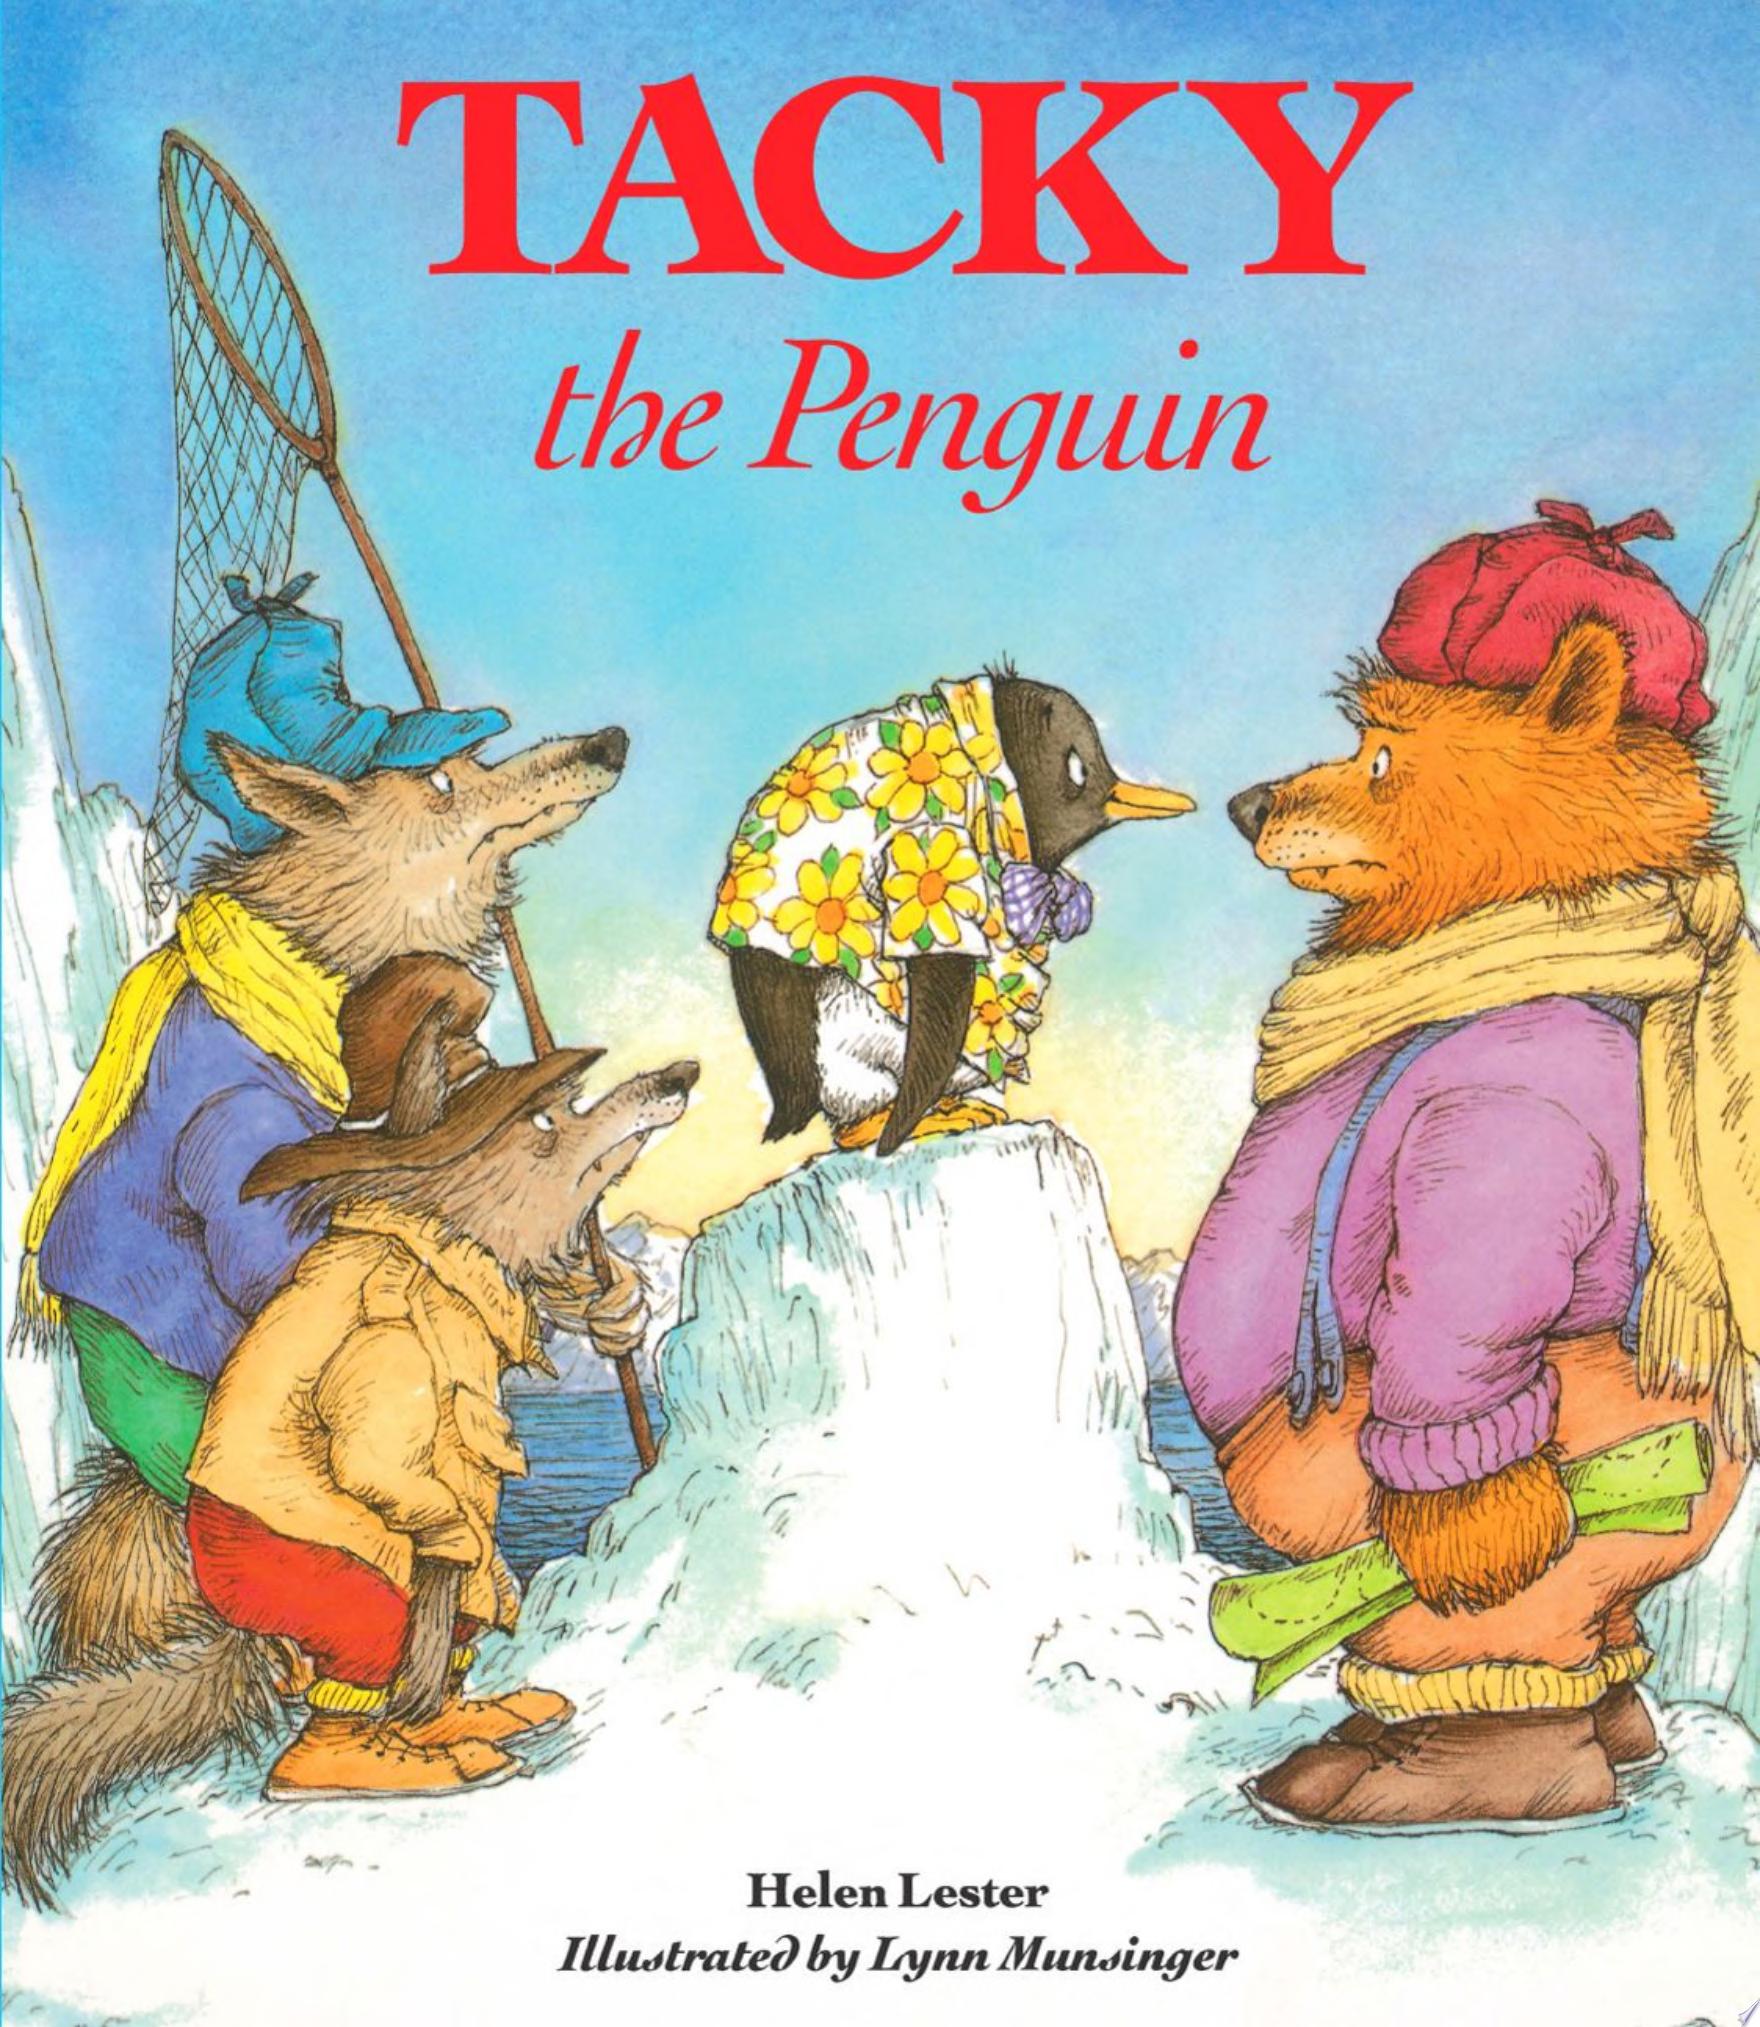 Image for "Tacky the Penguin"